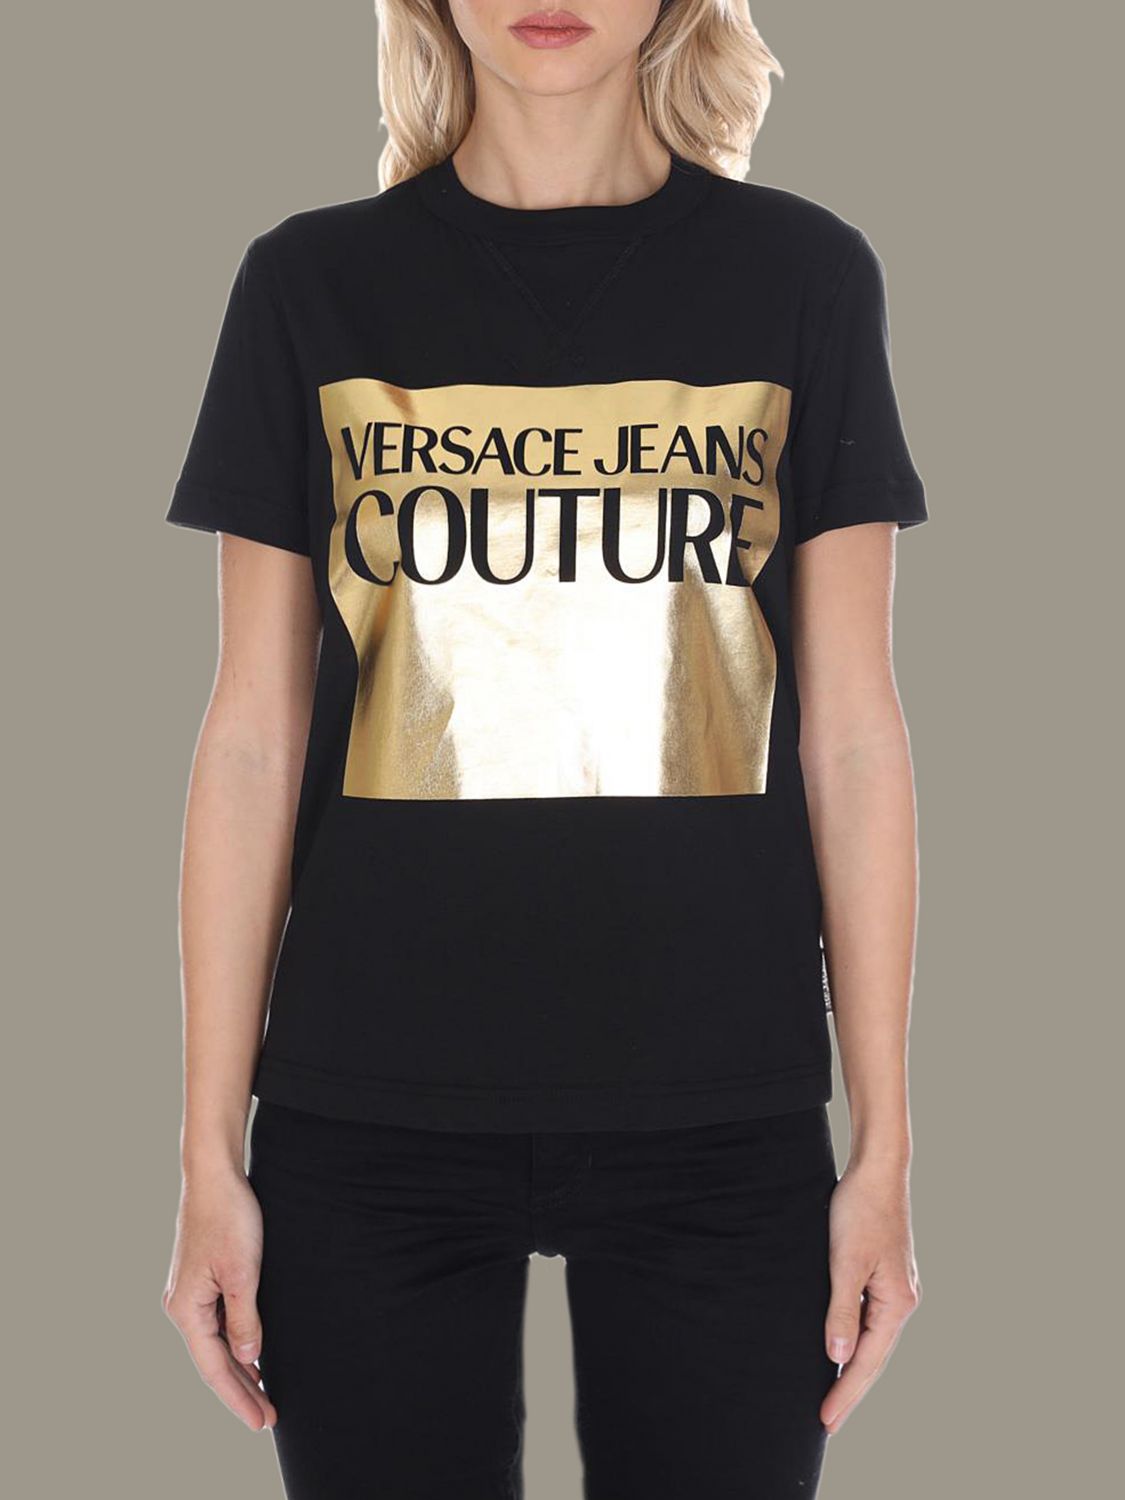 Versace Jeans Outlet: t-shirt with laminated print - Black | Versace ...